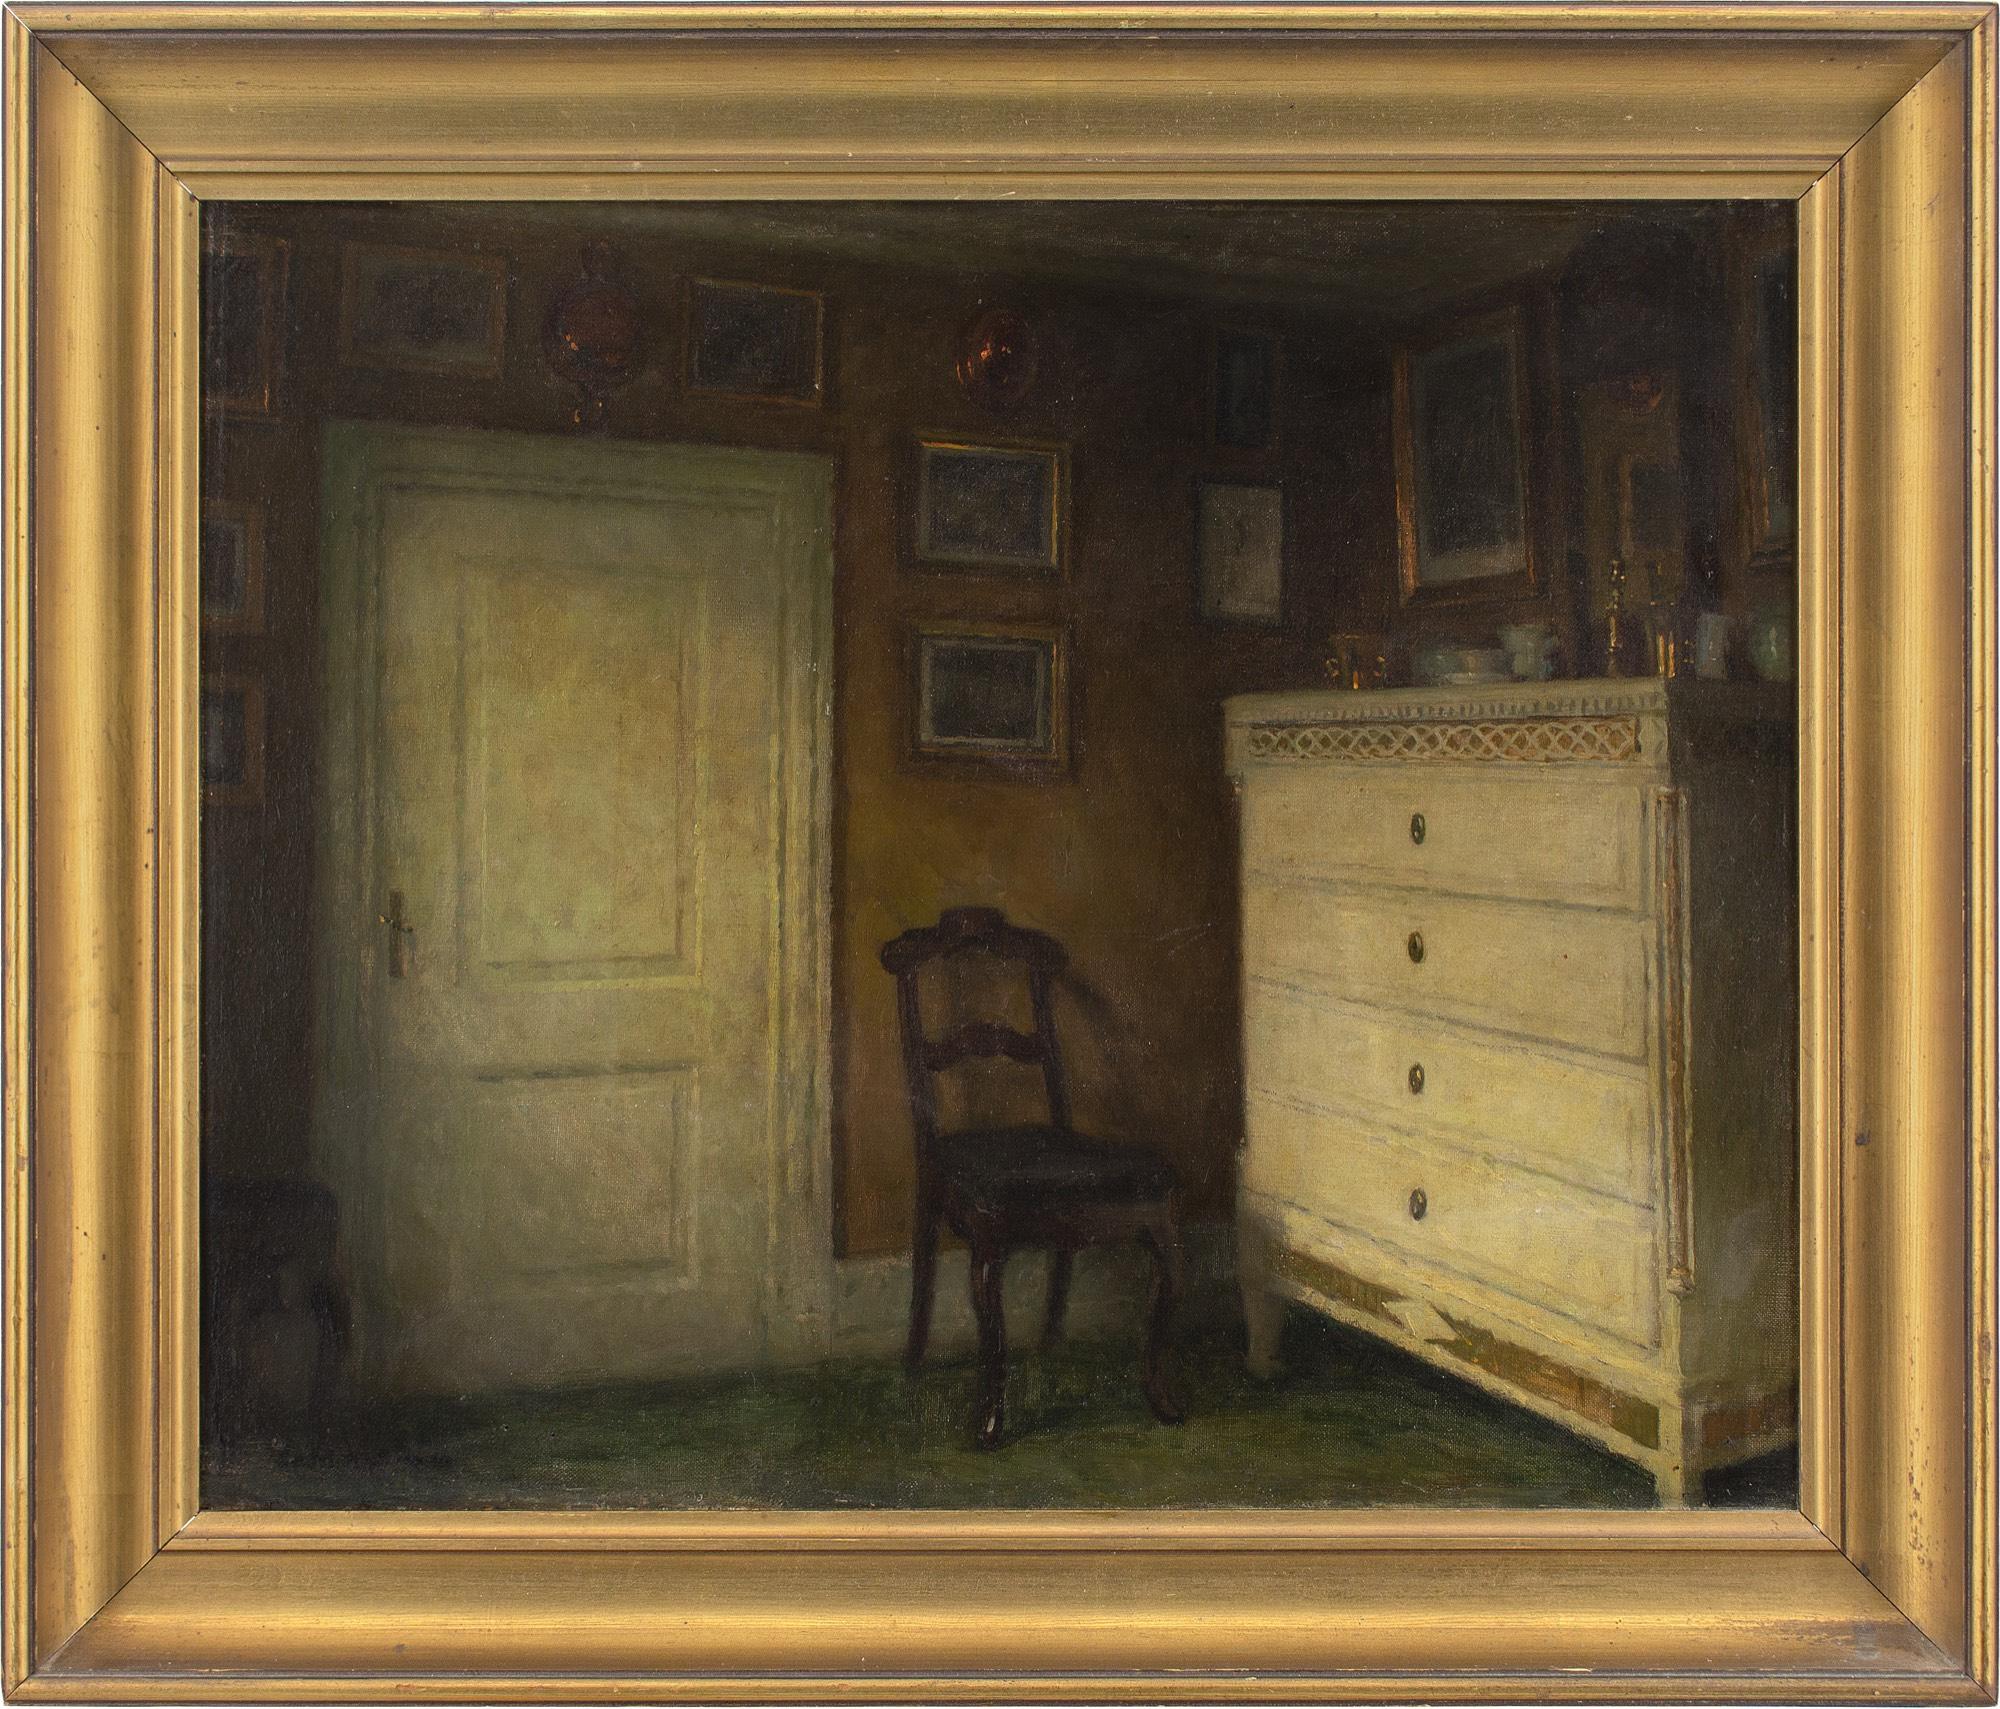 This early 20th-century oil painting by Danish artist Bertel Hansen-Svaneke (1883-1937) depicts an interior with chest of drawers, chair and gilt-framed artworks.

Hansen-Svaneke treasured introspective moments of quiet solitude. When silence is